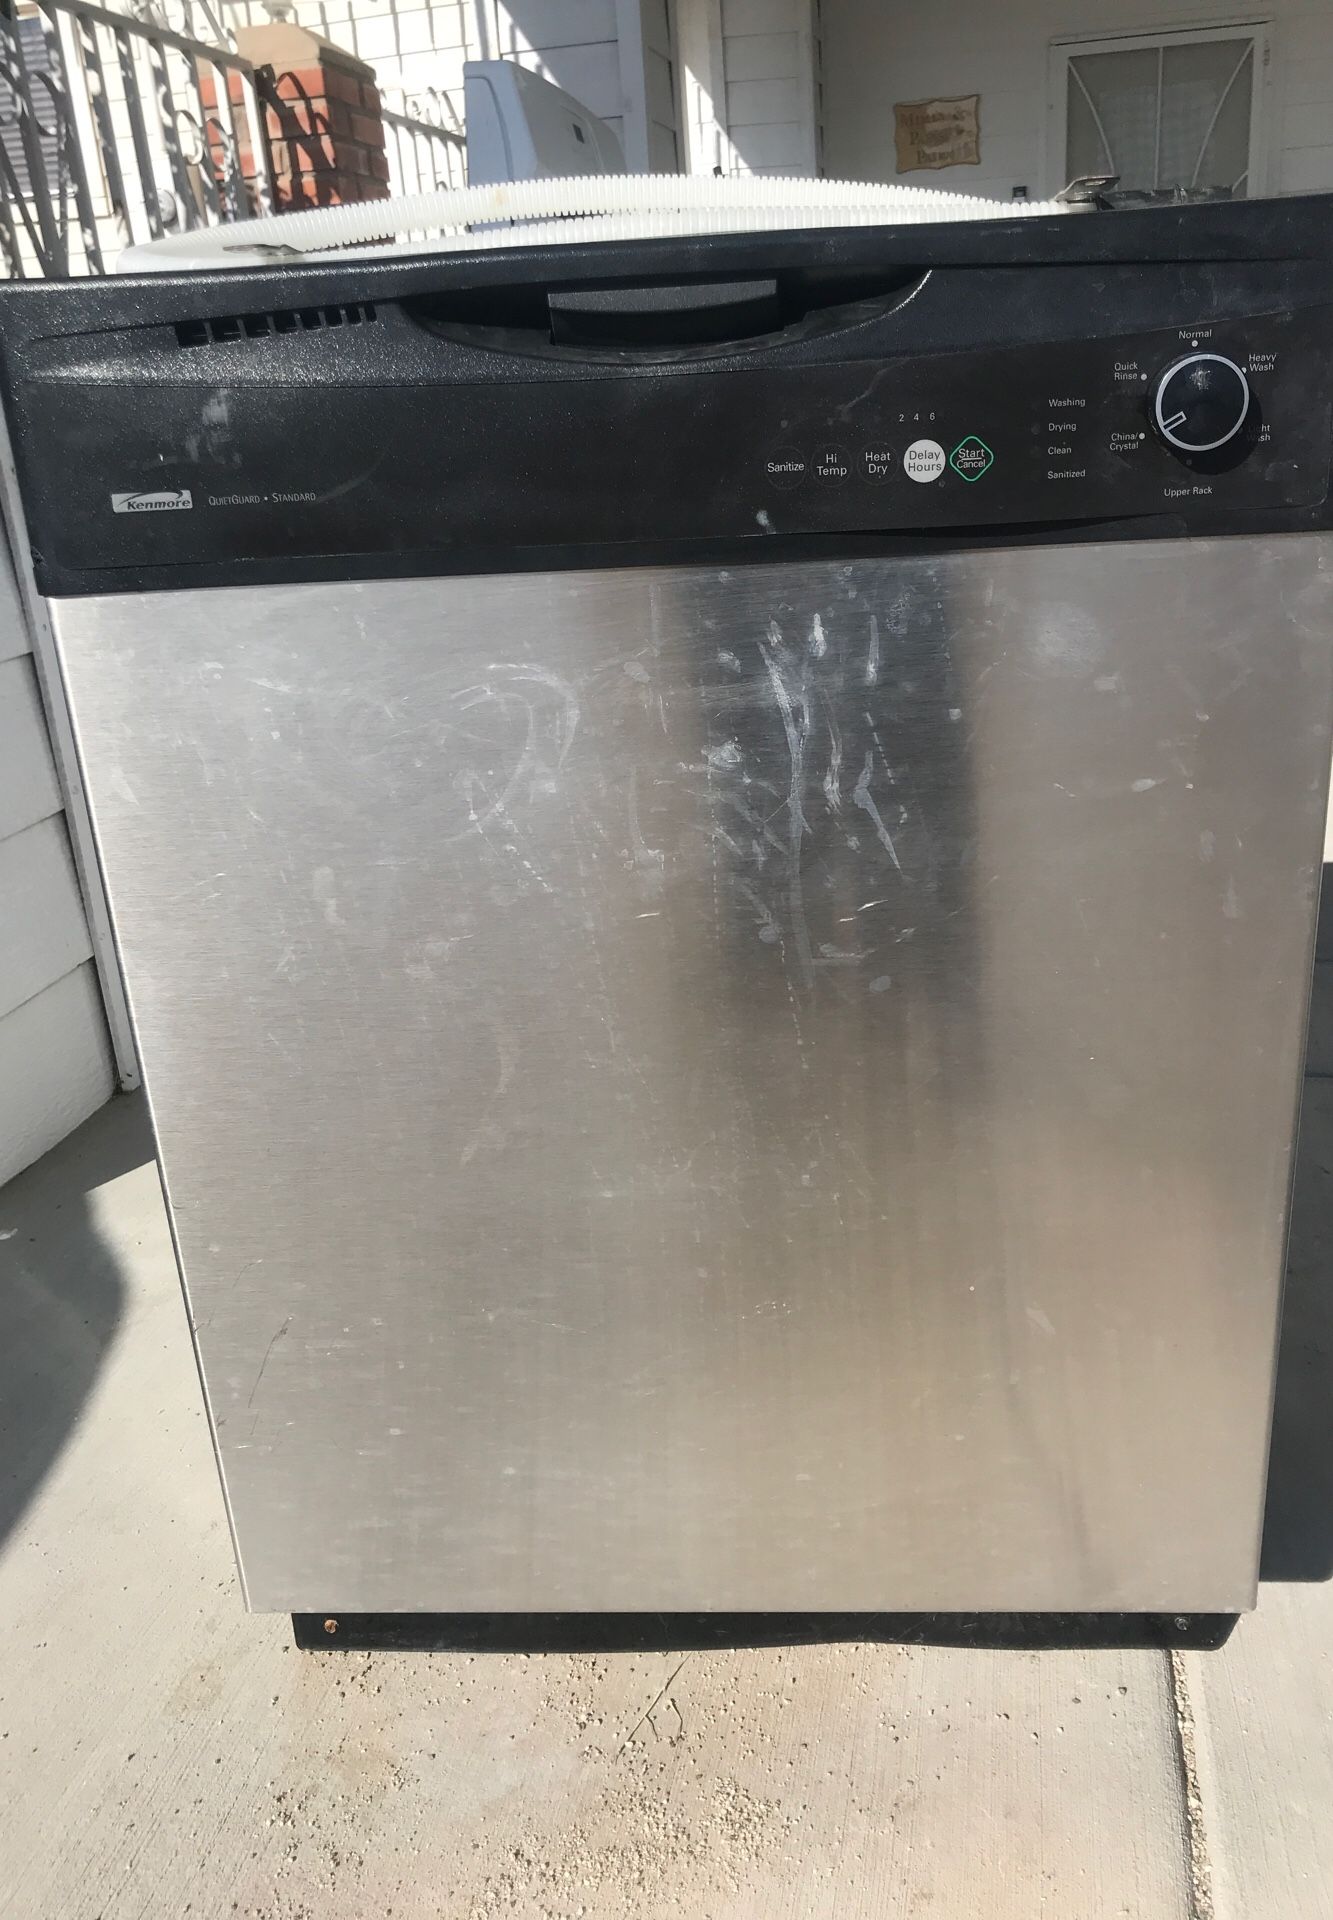 Kenmore. Quiet guard dish washer